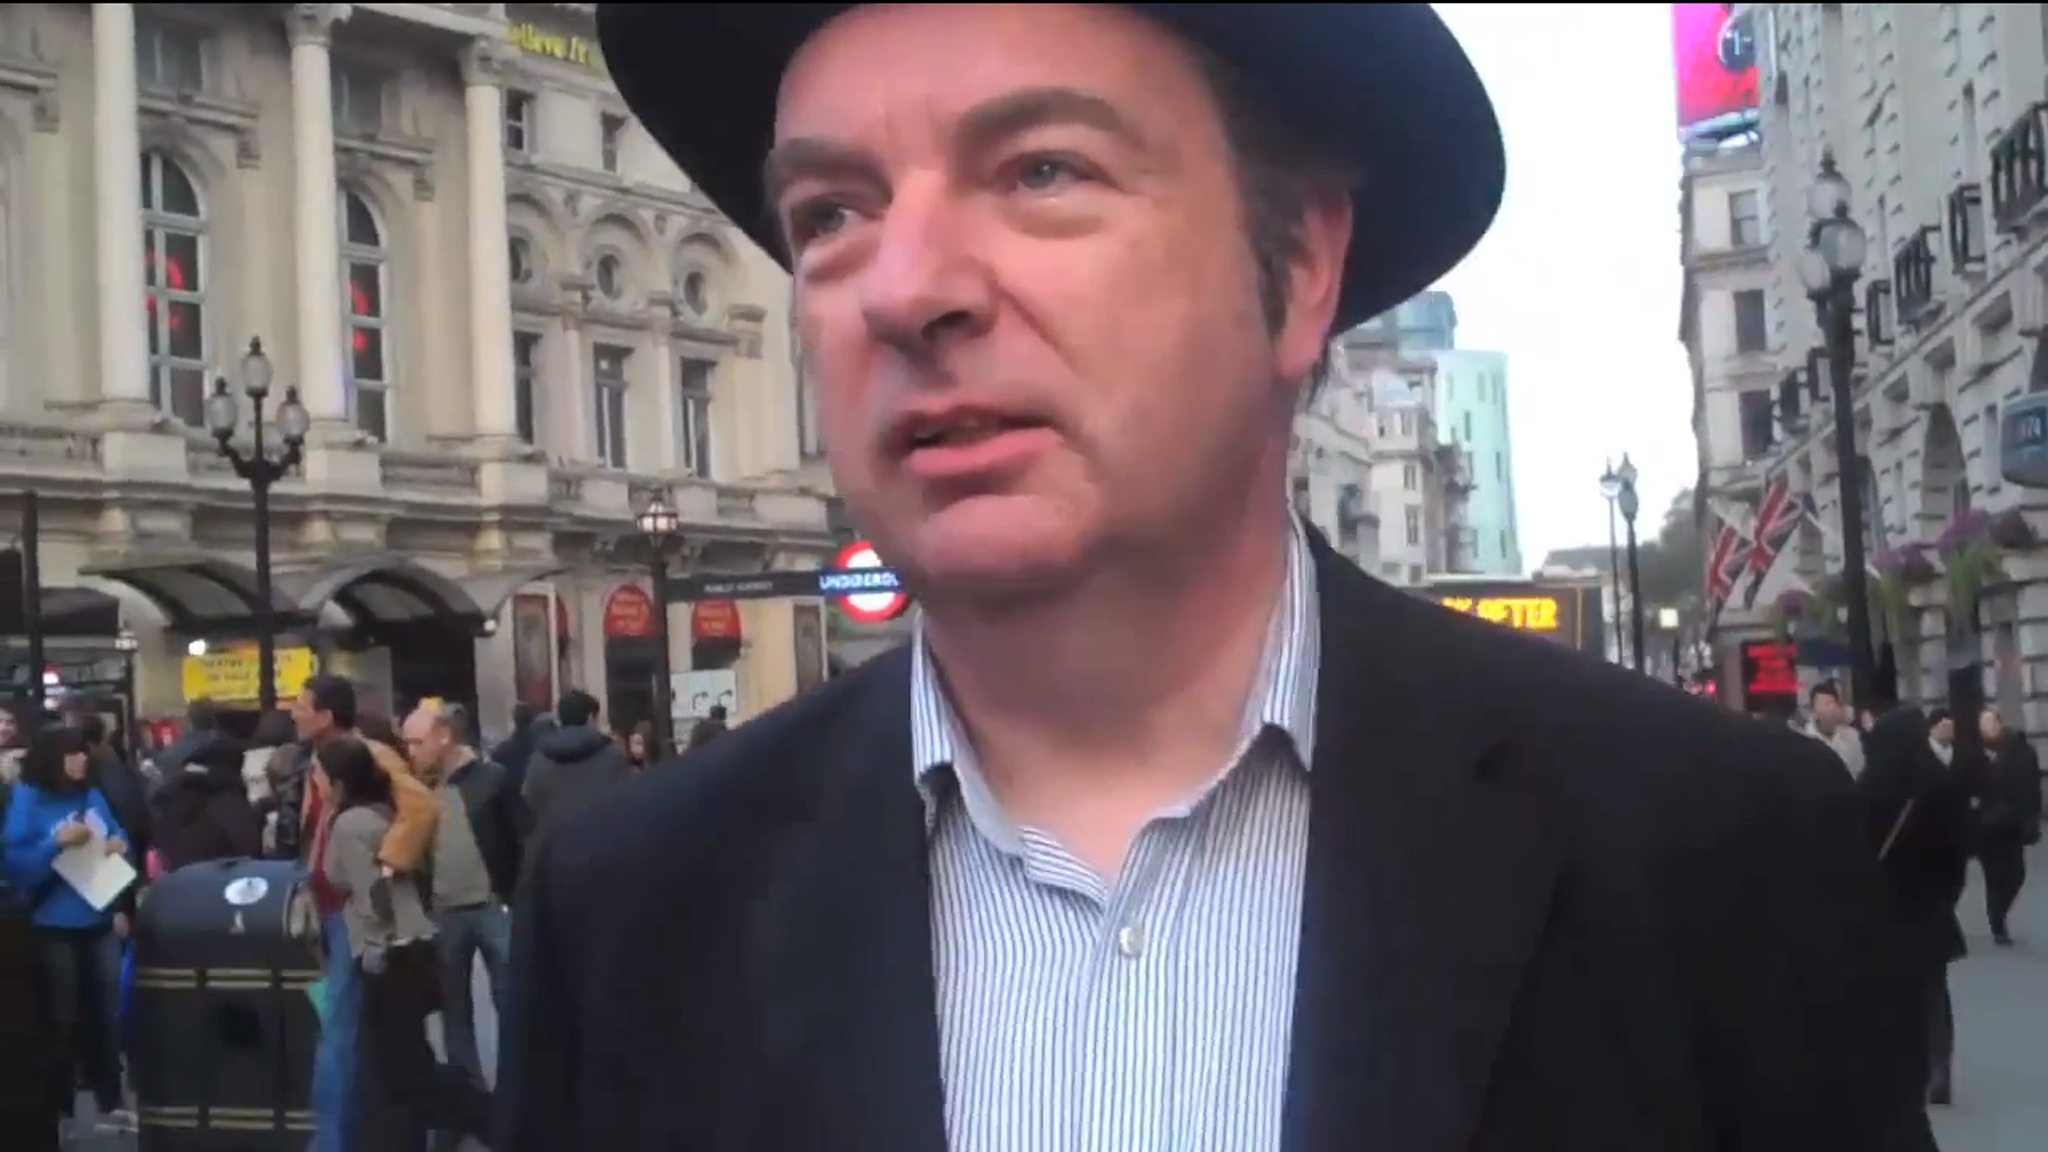 Lib Dem MP Norman Baker in the video for his single "Picadilly Circus"